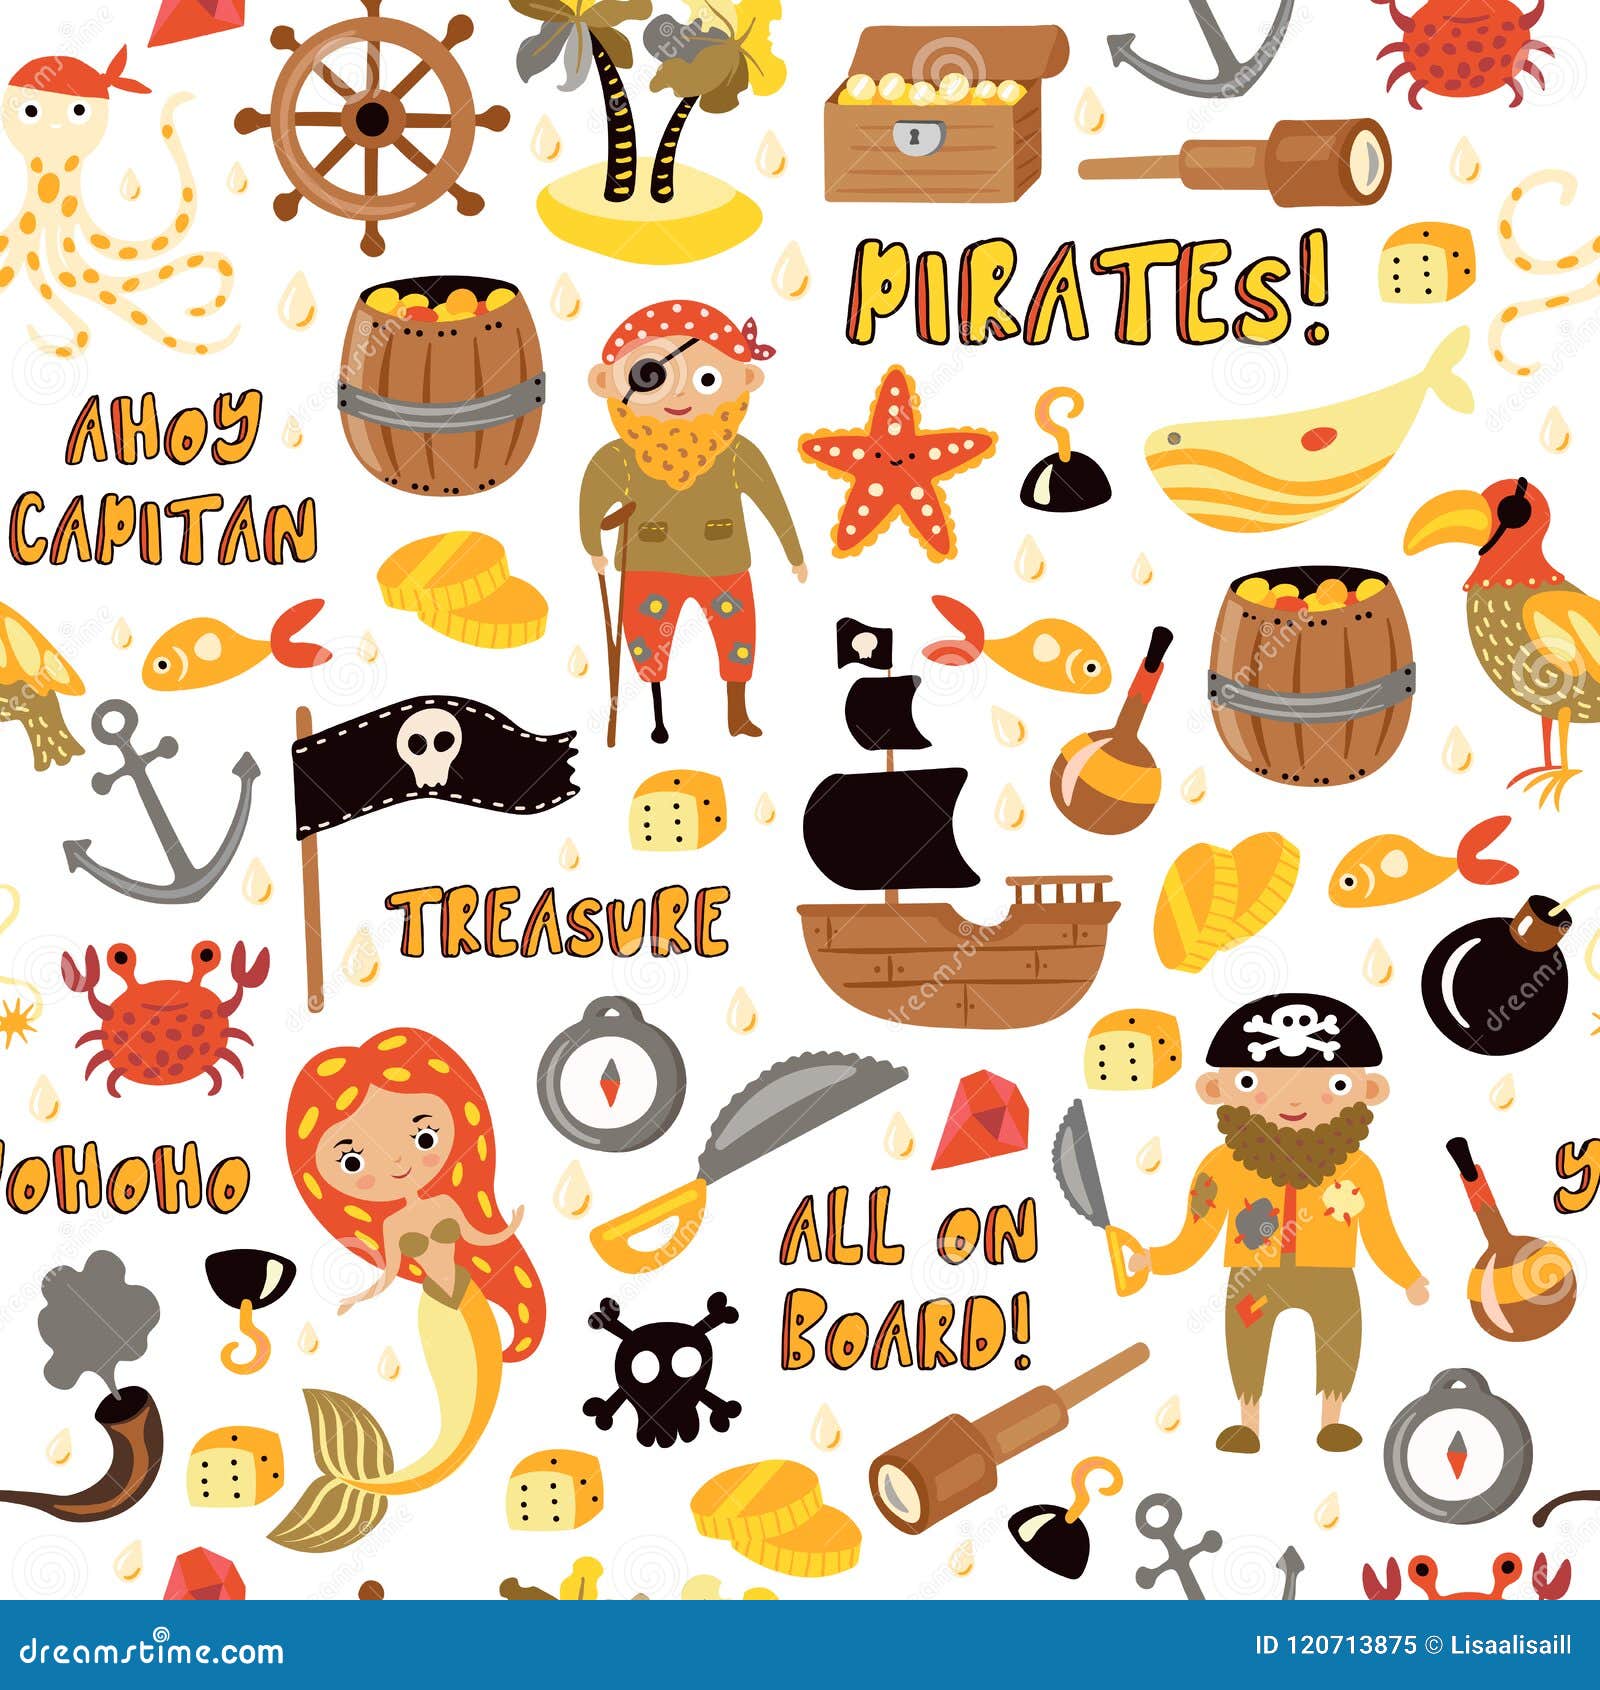 Set of stickers and objects on pirate theme Vector Image